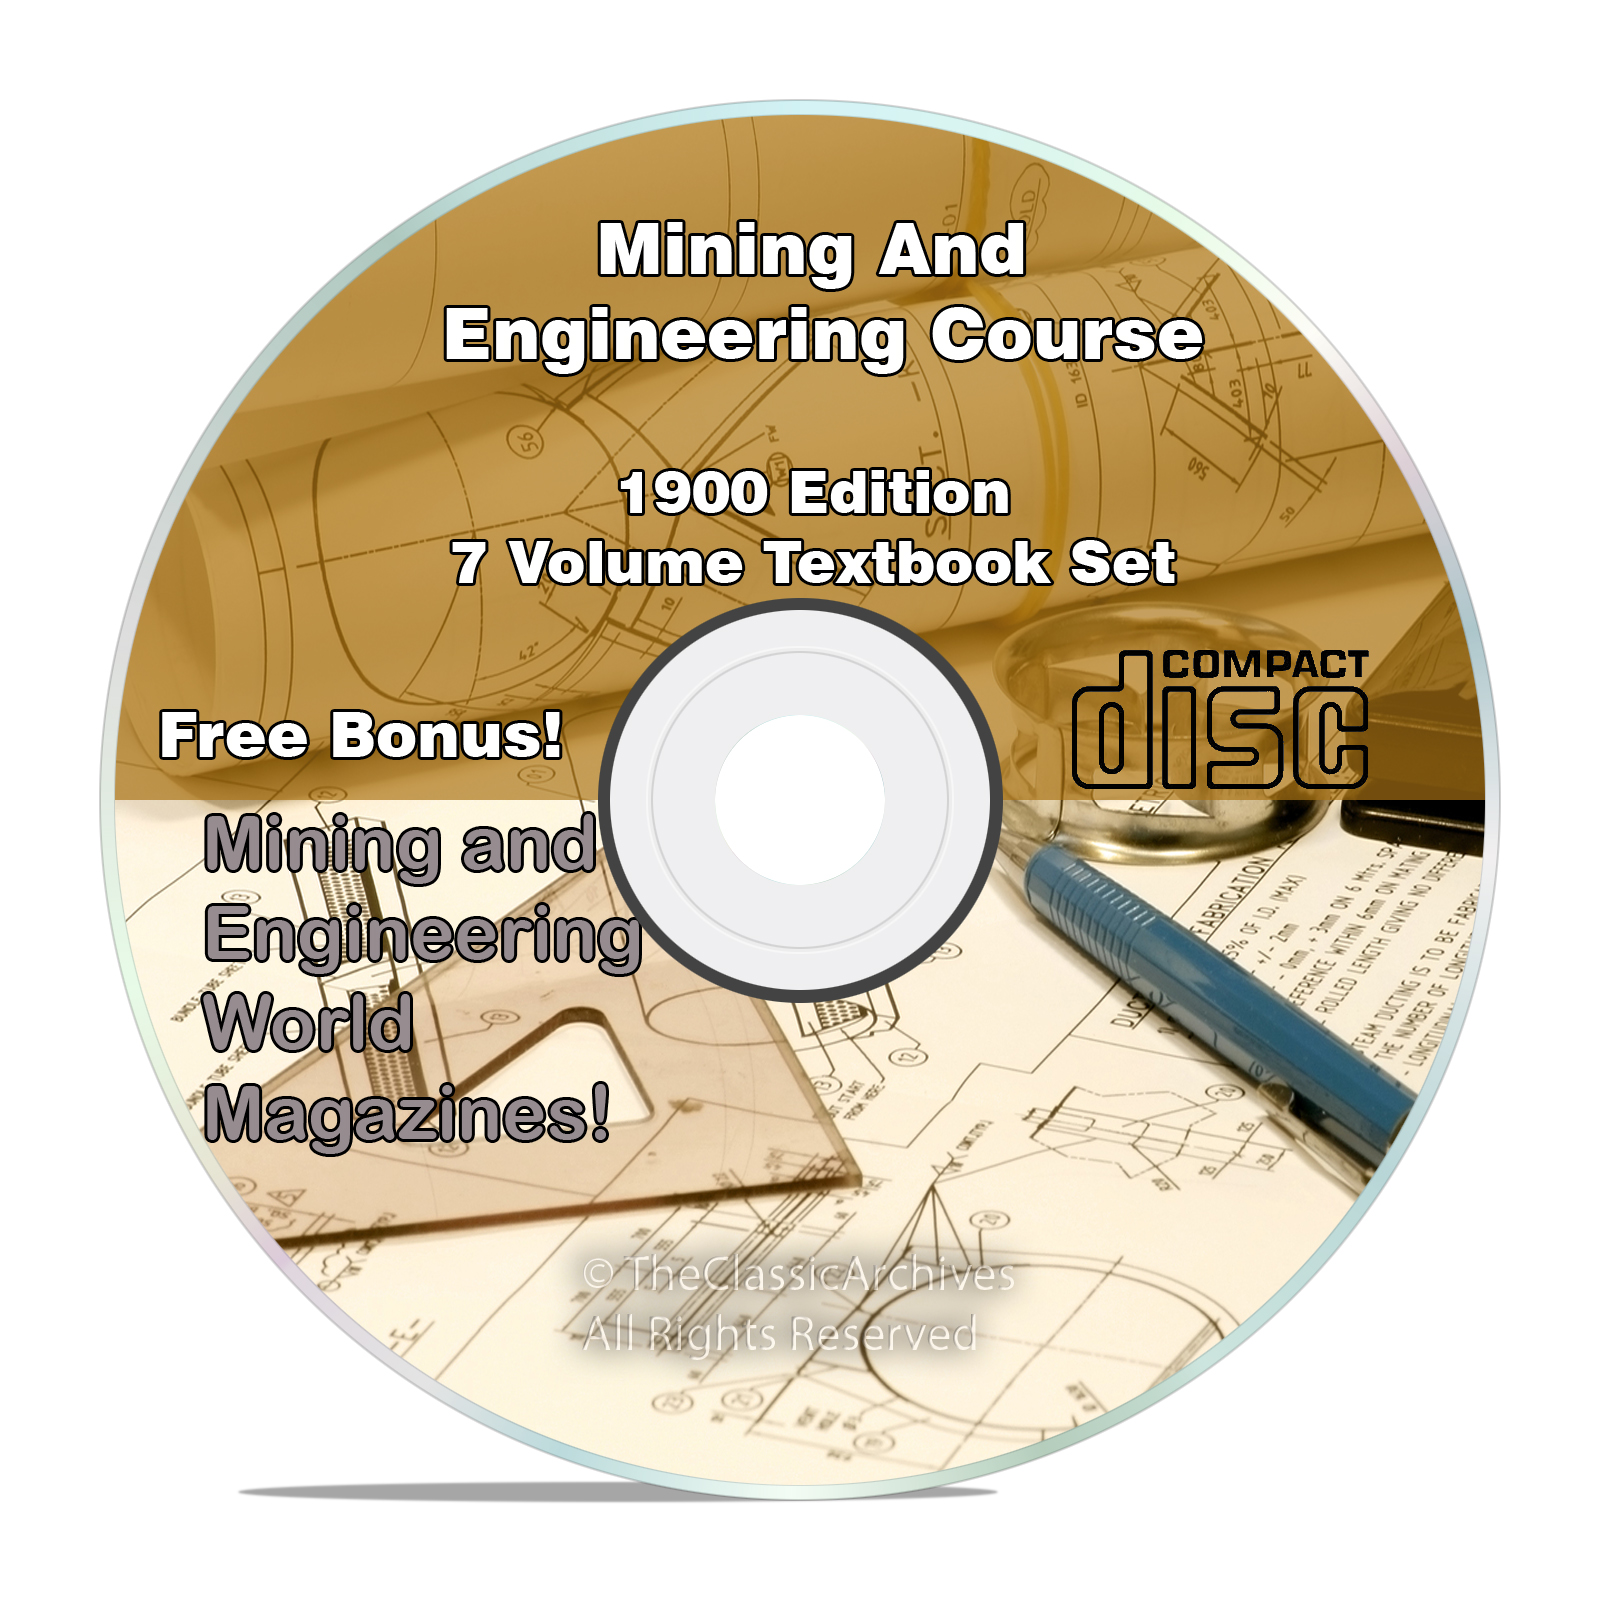 Mining & Engineering Textbook Course, Learn How To Mine Gold, 7 Volume CD